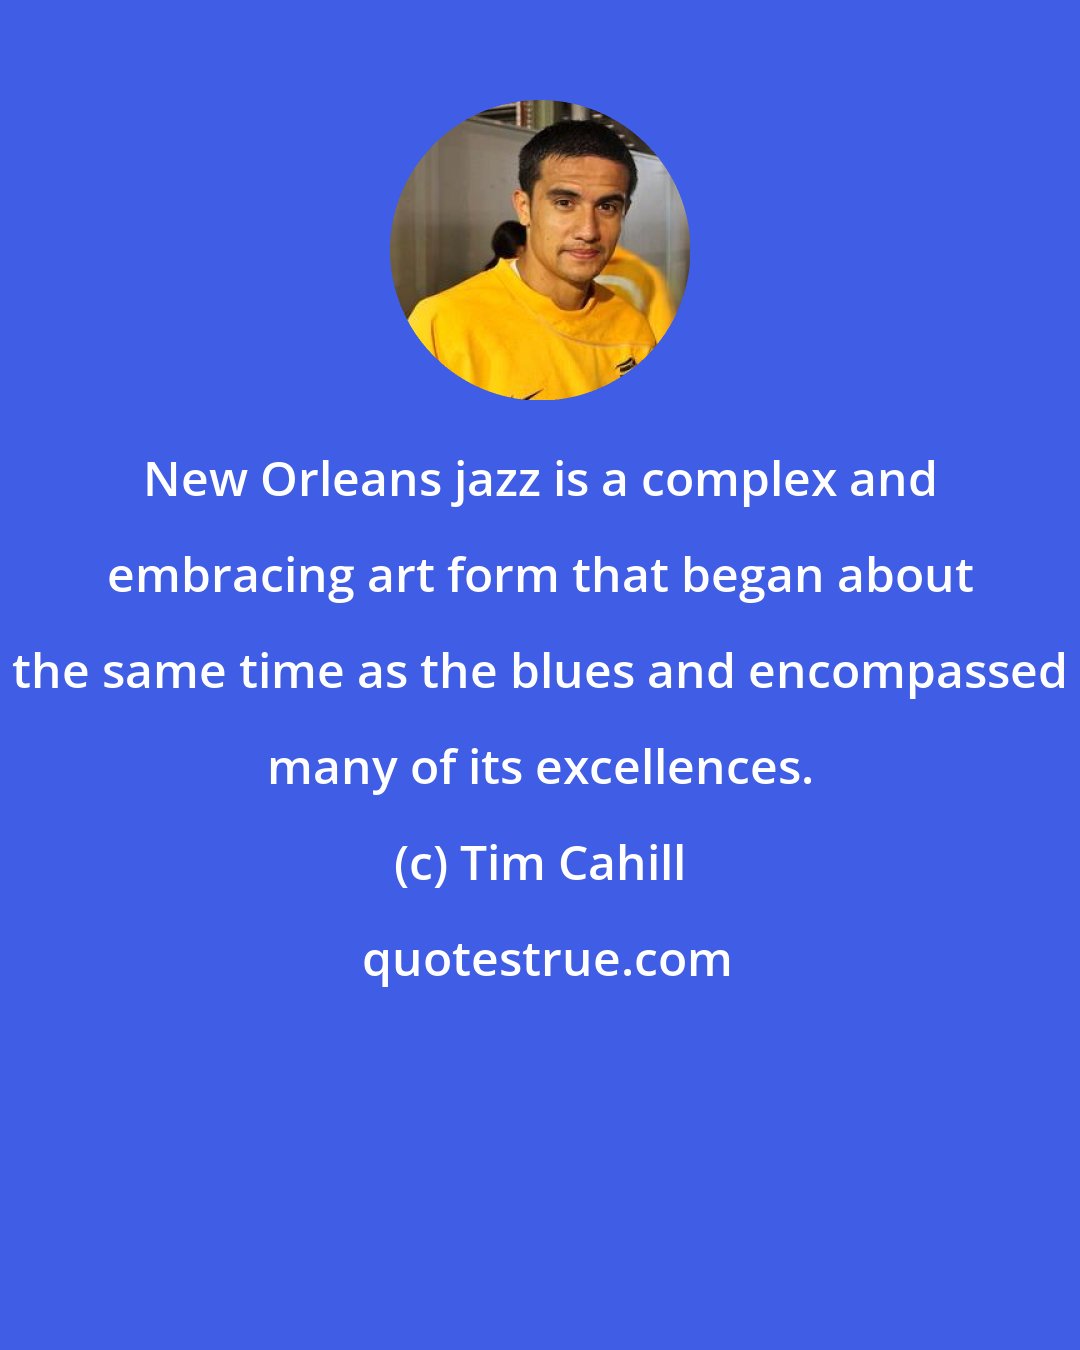 Tim Cahill: New Orleans jazz is a complex and embracing art form that began about the same time as the blues and encompassed many of its excellences.